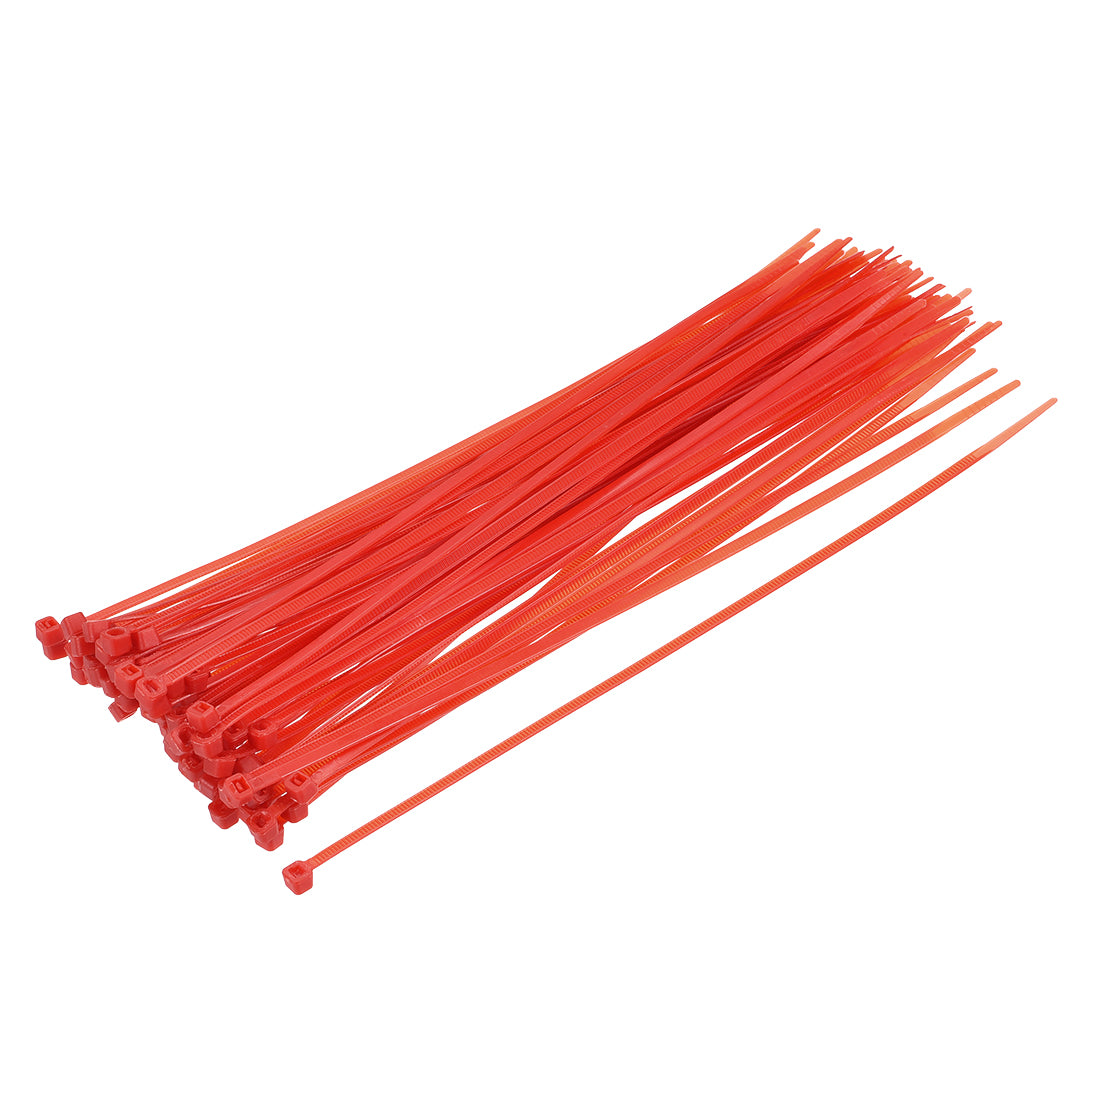 uxcell Uxcell Cable Zip Ties 250mmx3.6mm Self-Locking Nylon Tie Wraps Red 40pcs